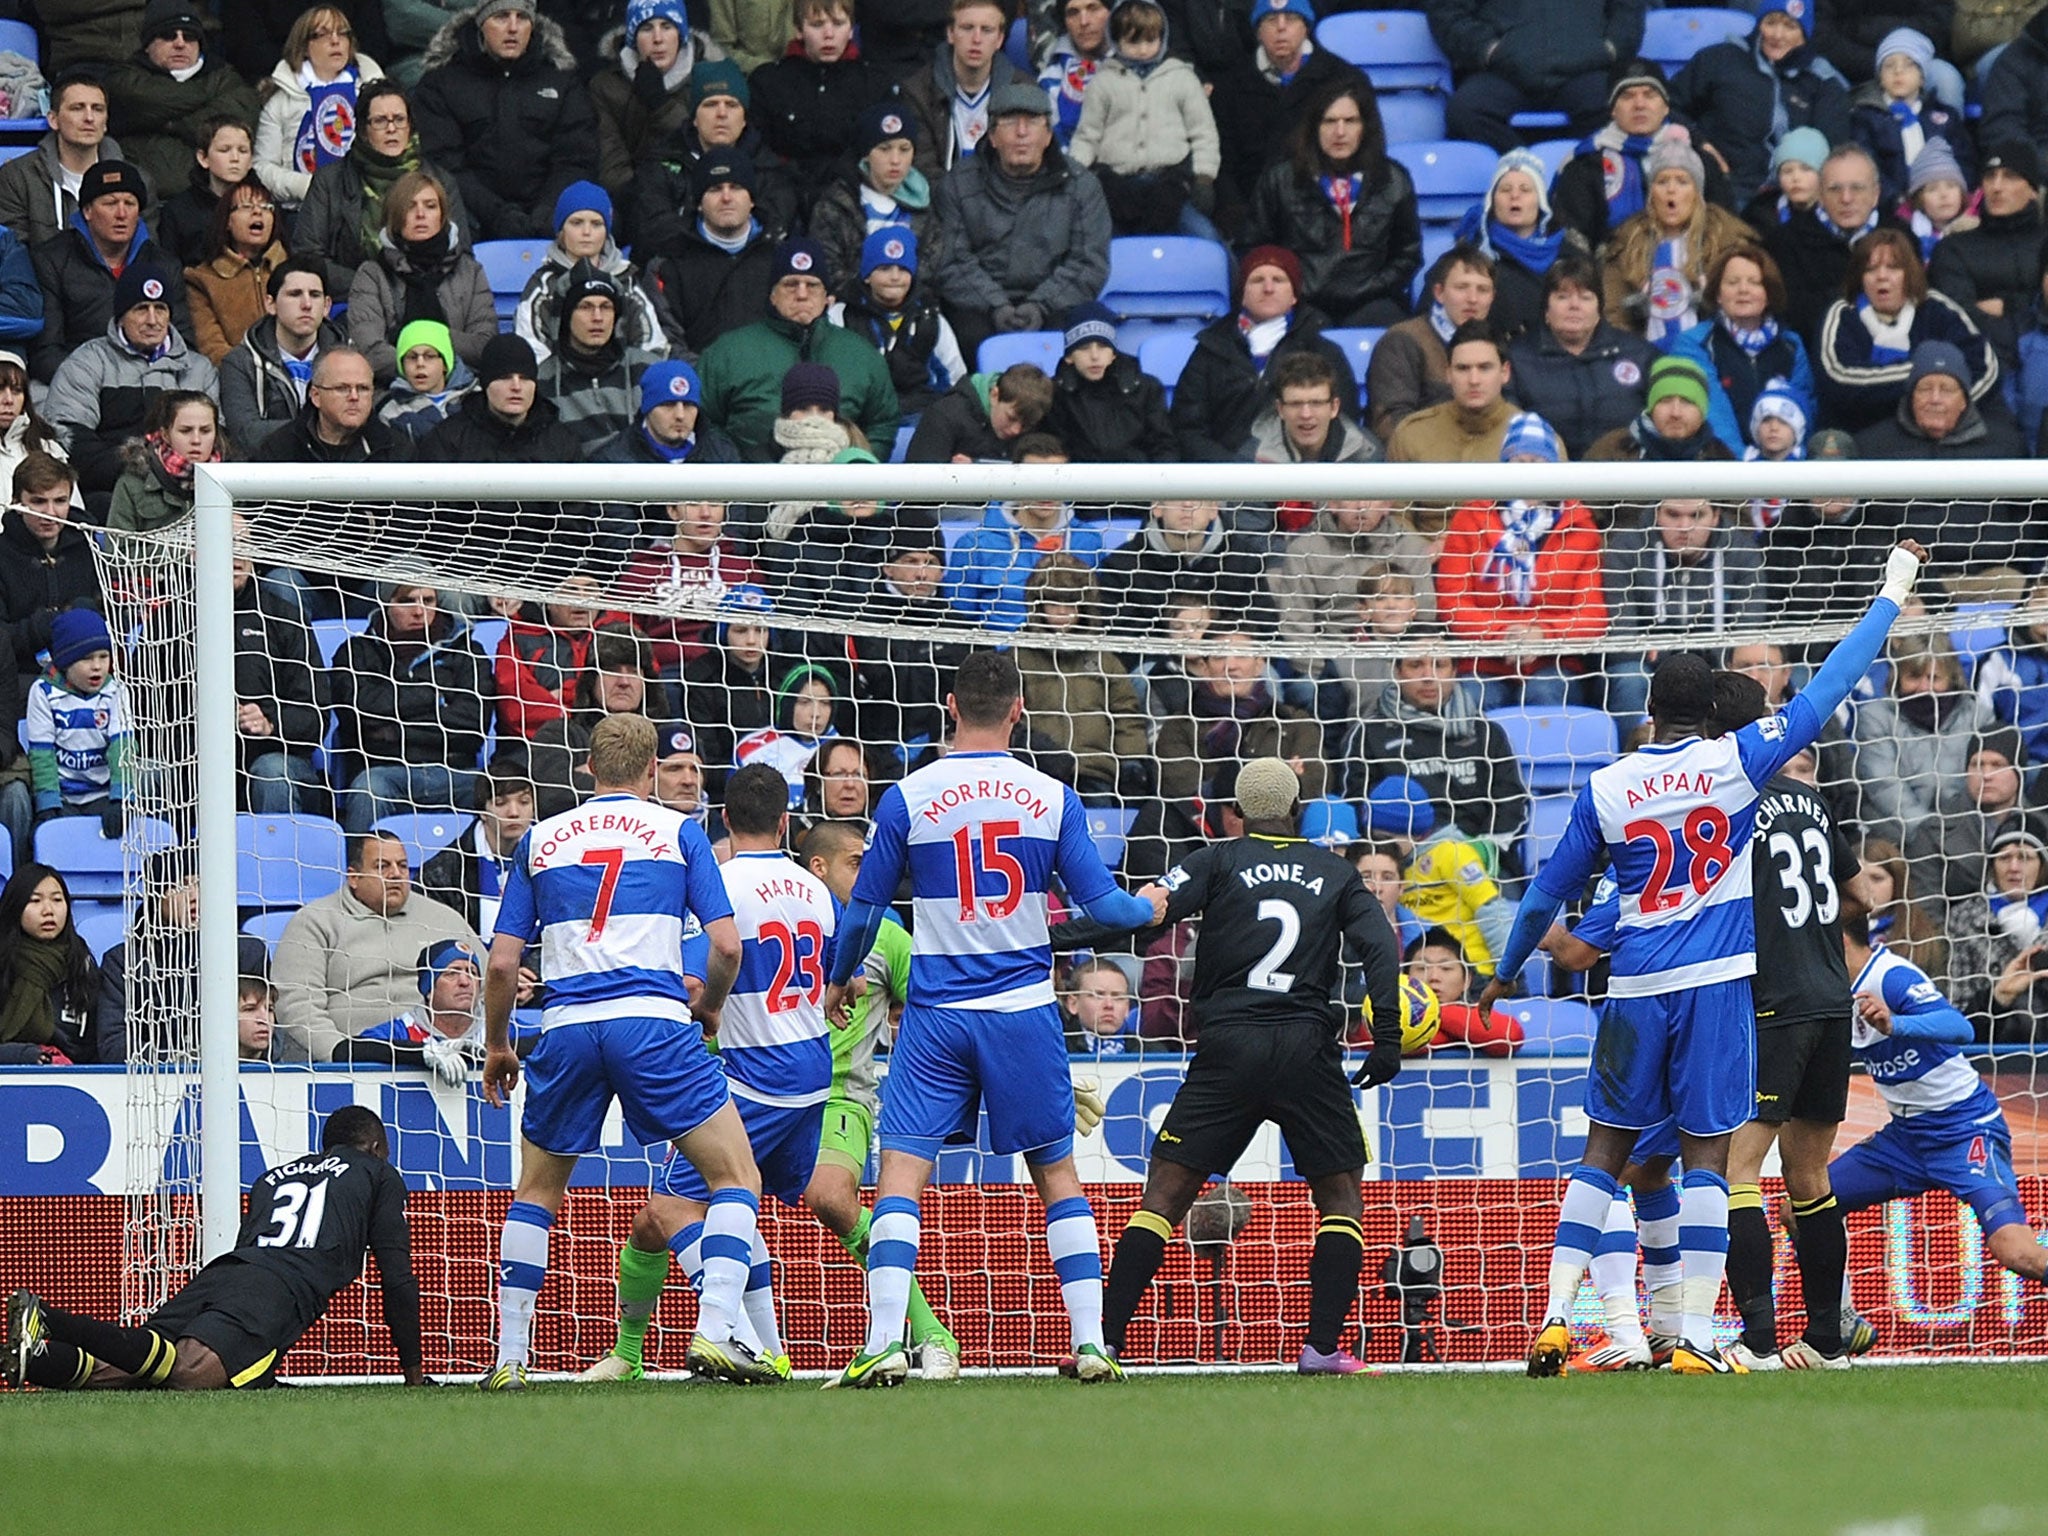 Reading watch as Wigan's Kone slots his goal home